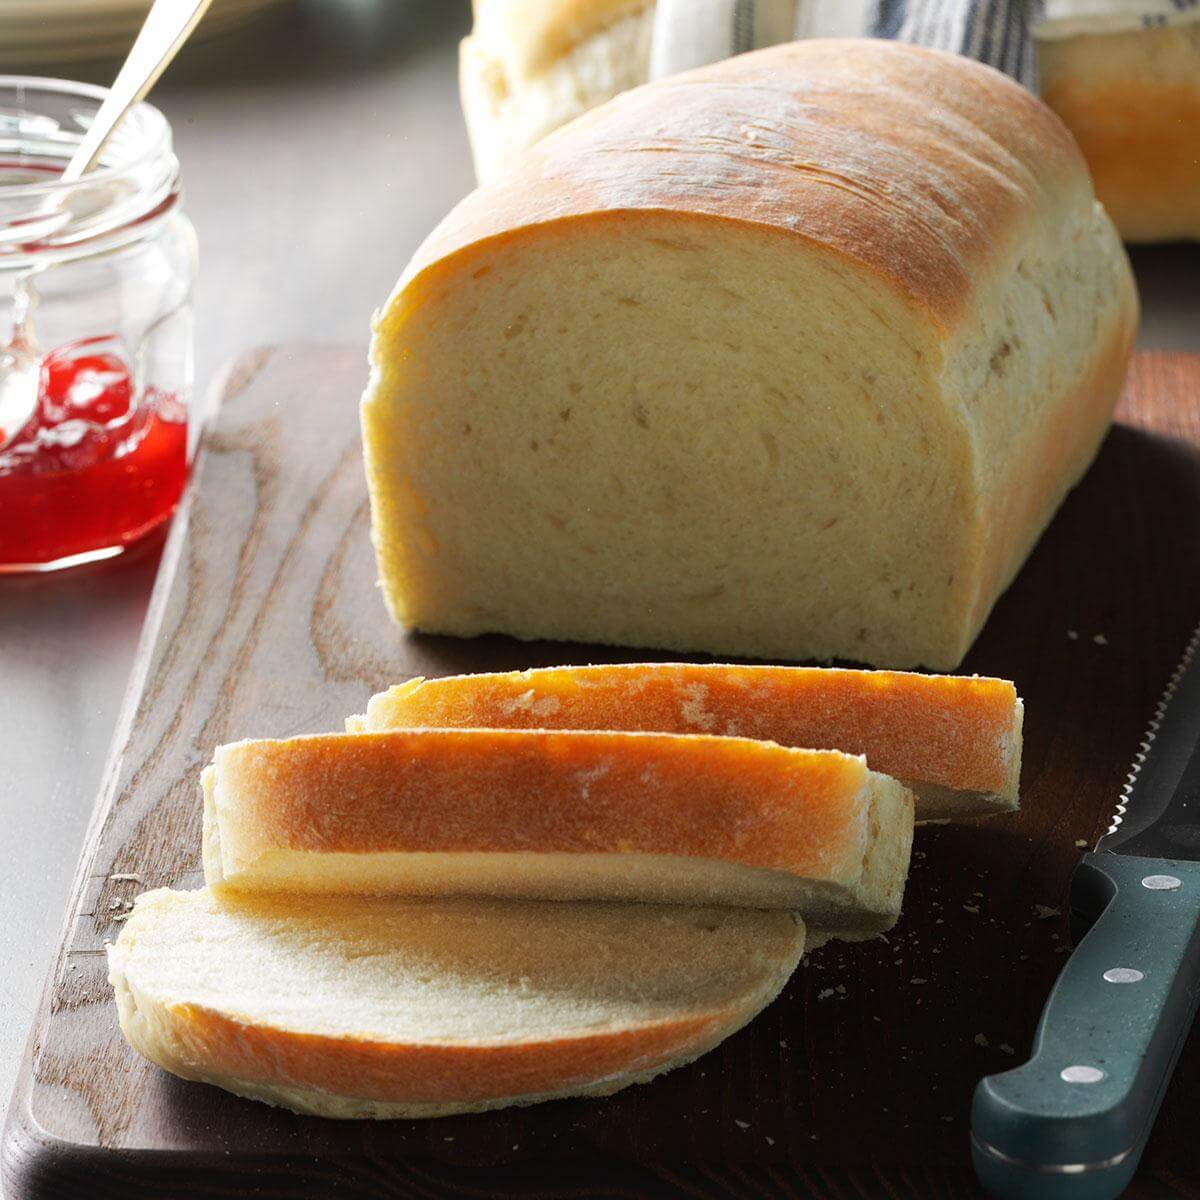 National Homemade Bread Day